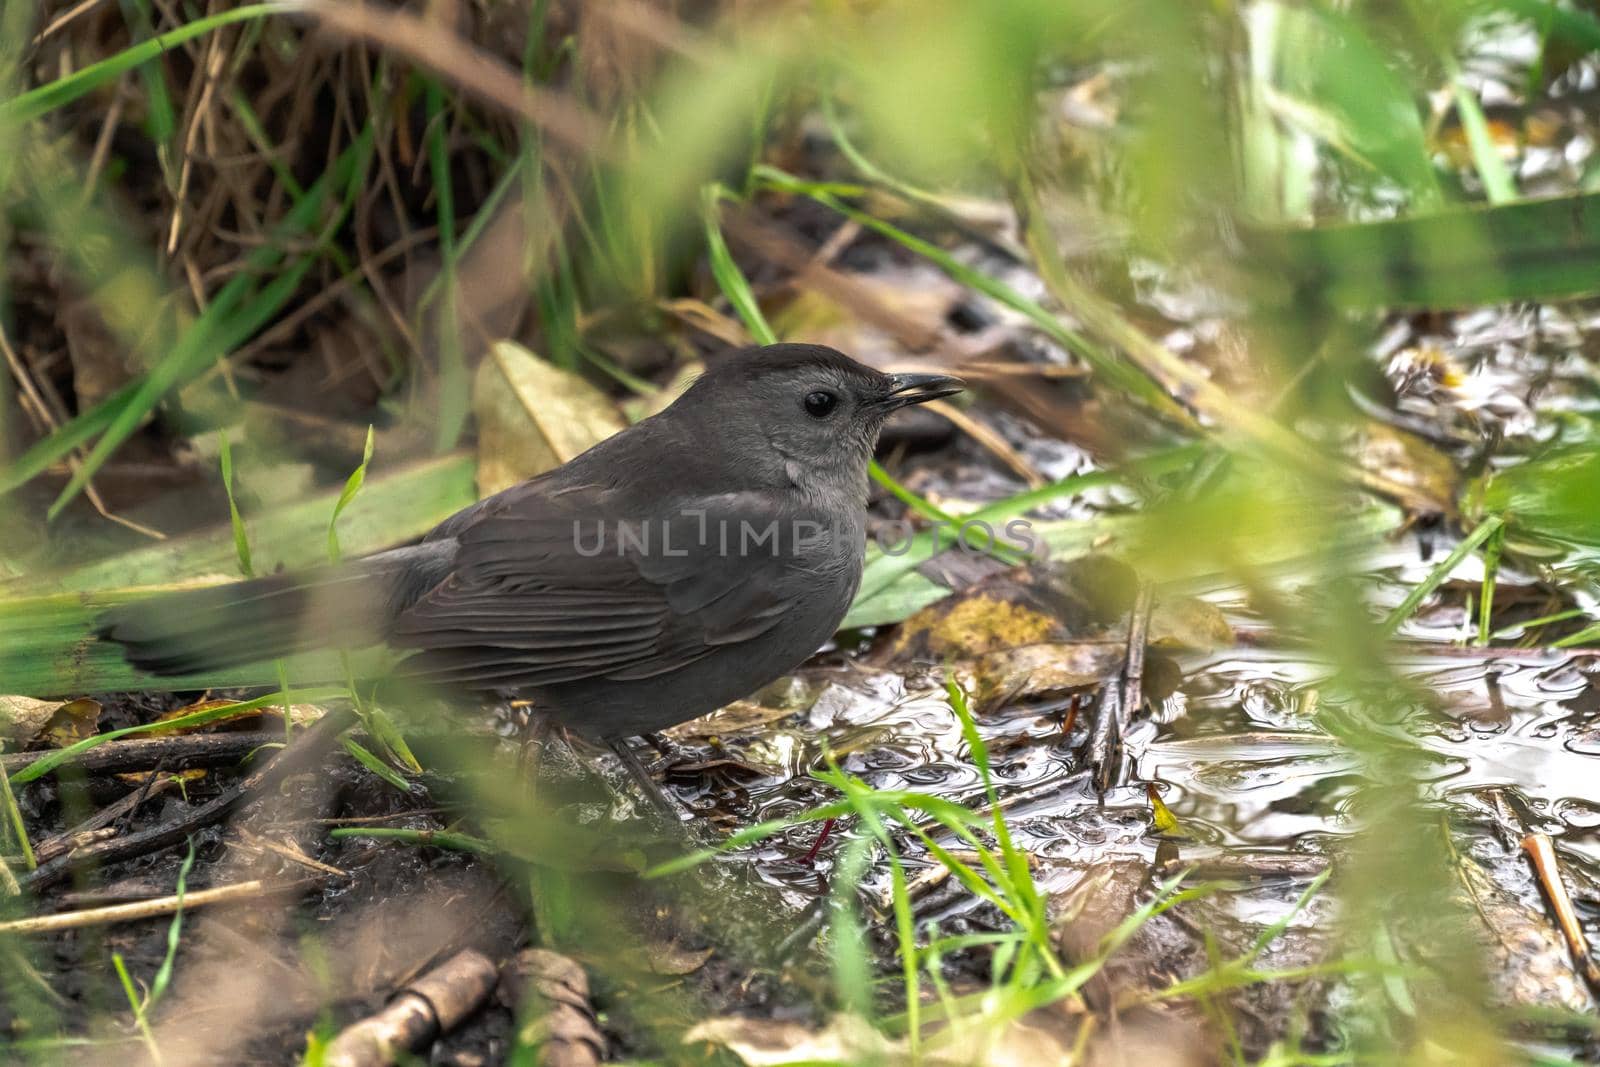 A close up bird wildlife photograph of a gray catbird getting a drink of water from a stream in the Midwest.